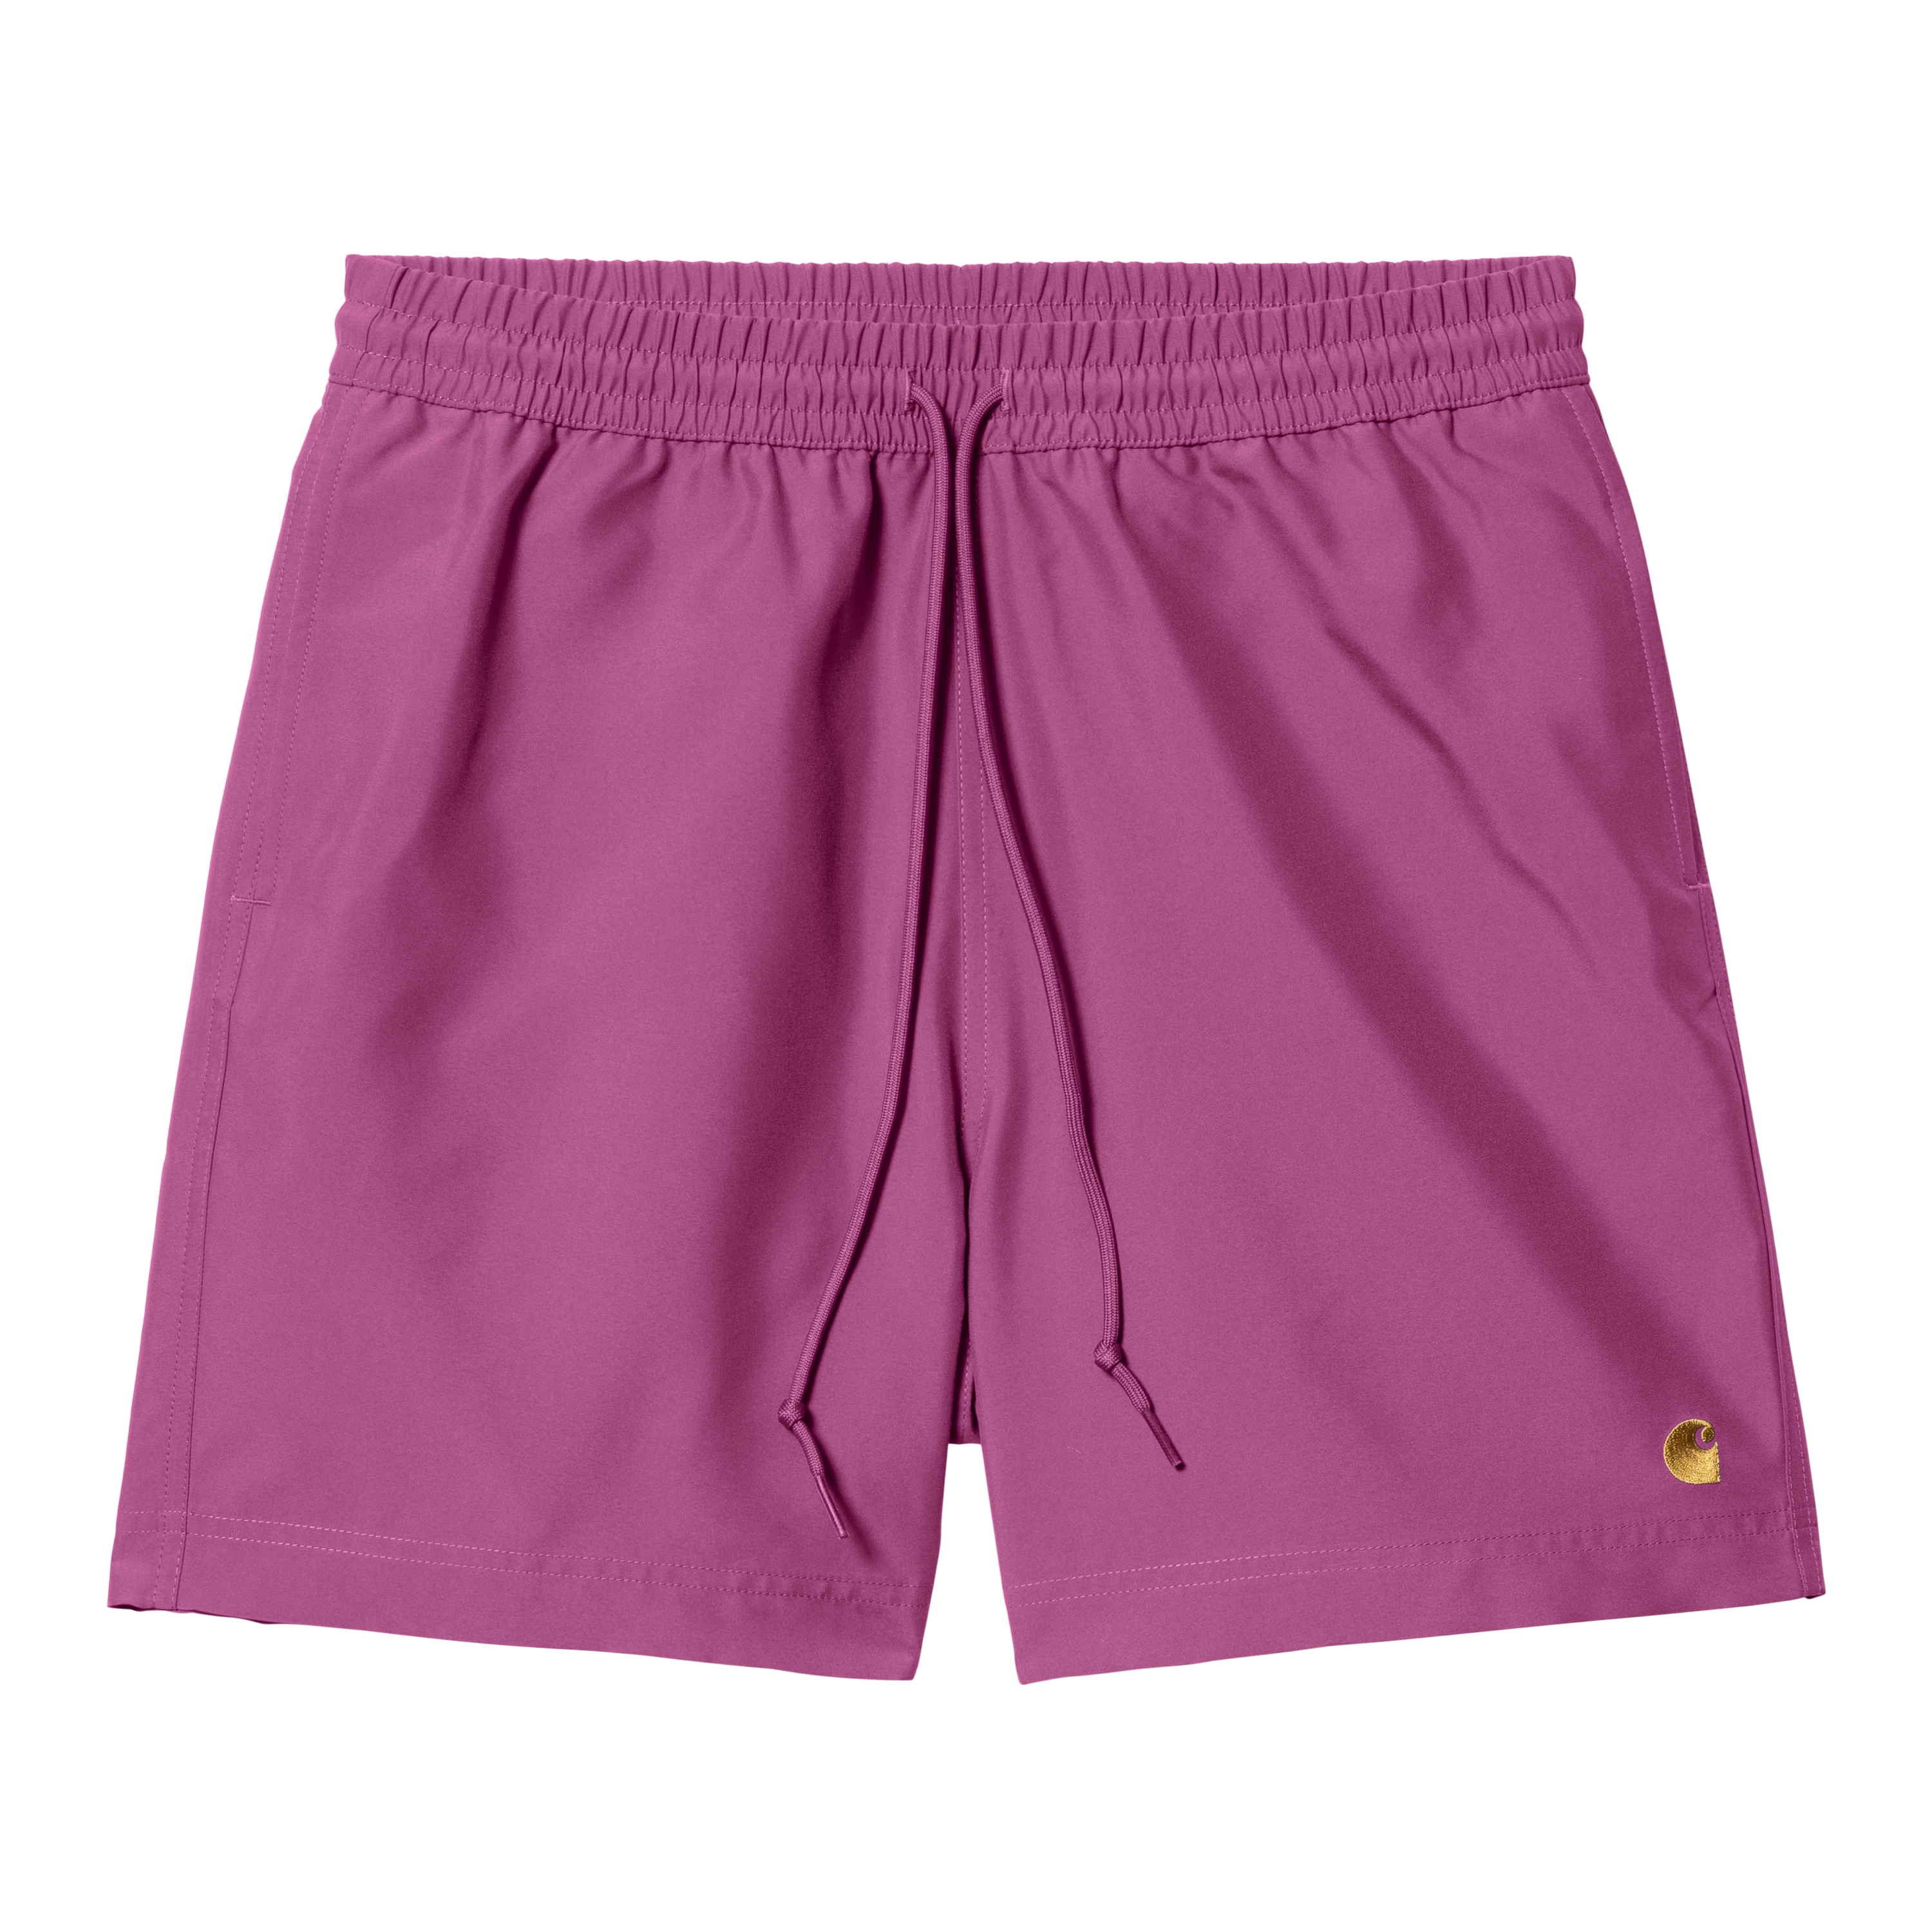 Carhartt WIP Chase Swim Trunk in Pink